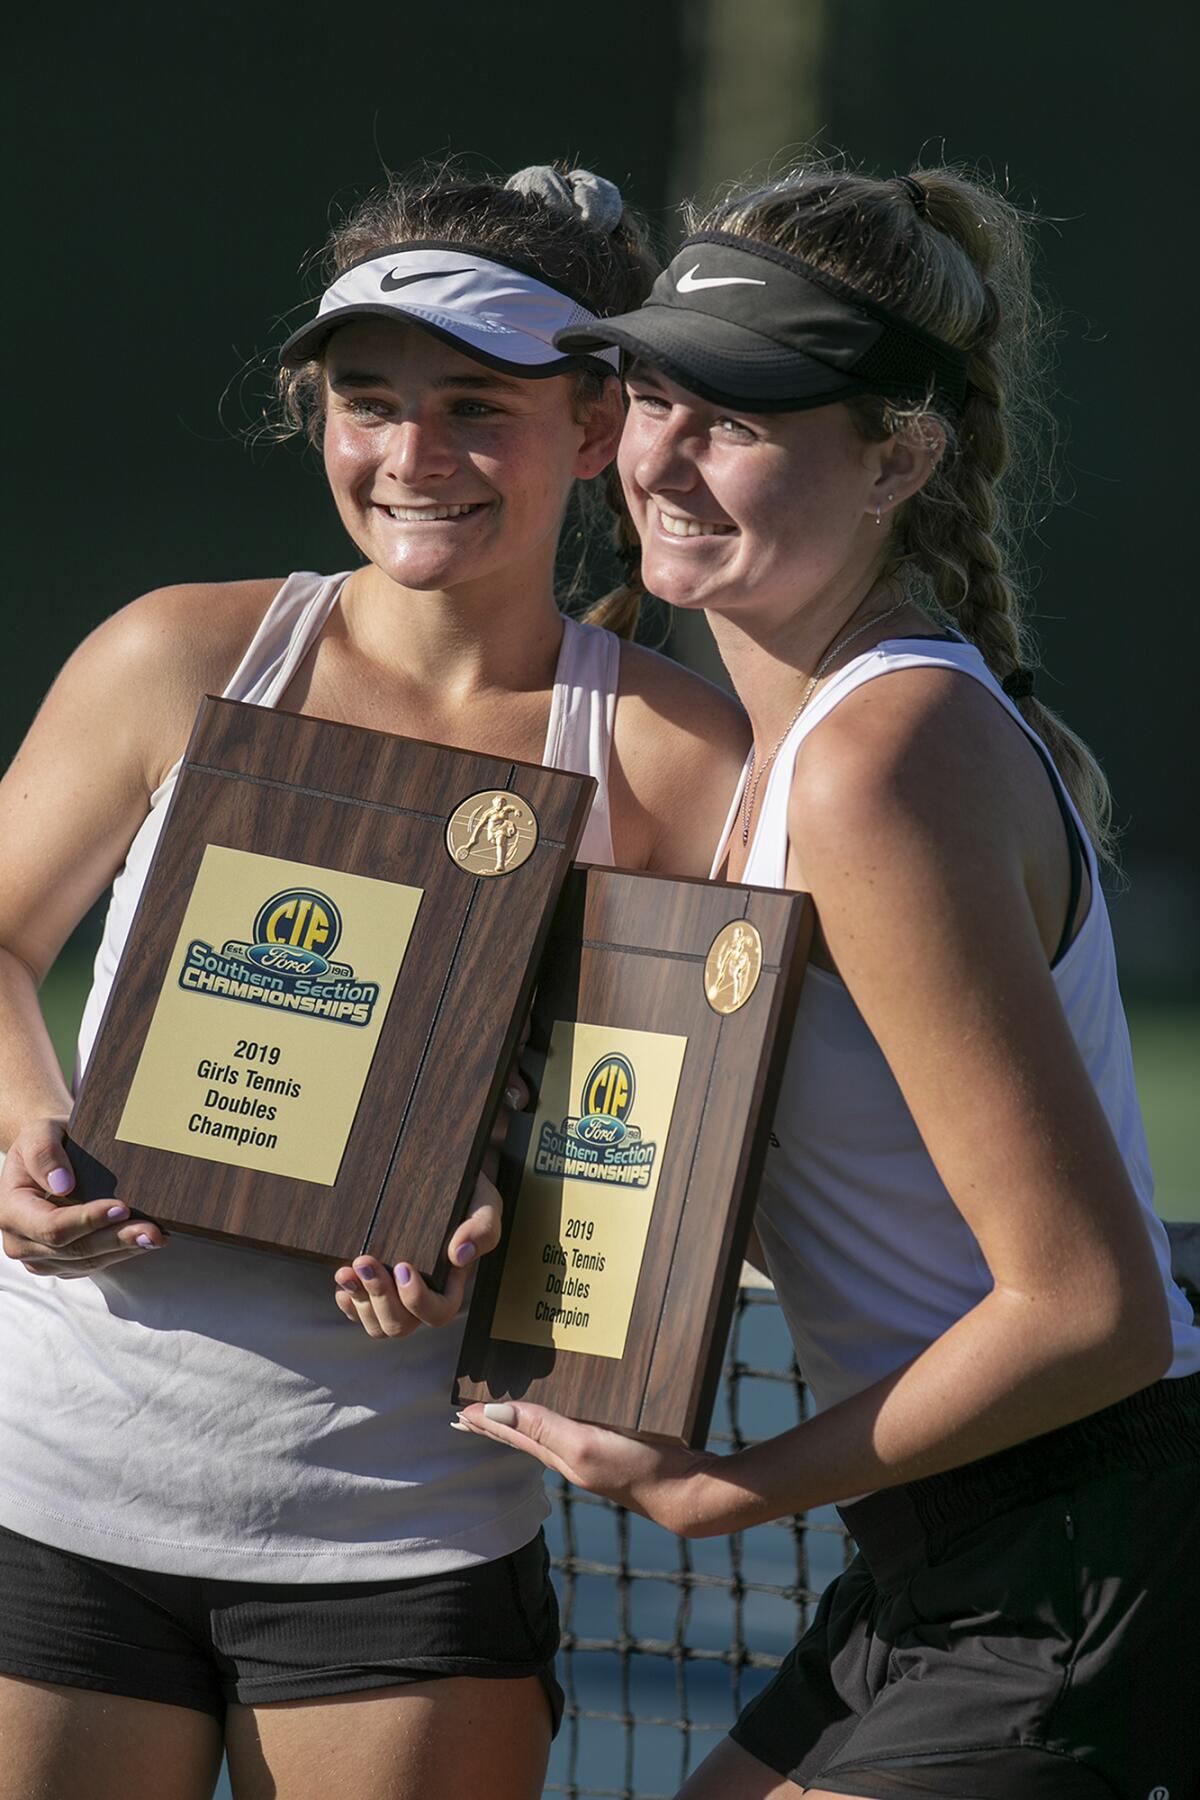 Laguna Beach’s Sarah MacCallum, left, and Ella Pachl pose with the CIF Southern Section Individuals doubles championship plaques on Monday at Seal Beach Tennis Center.